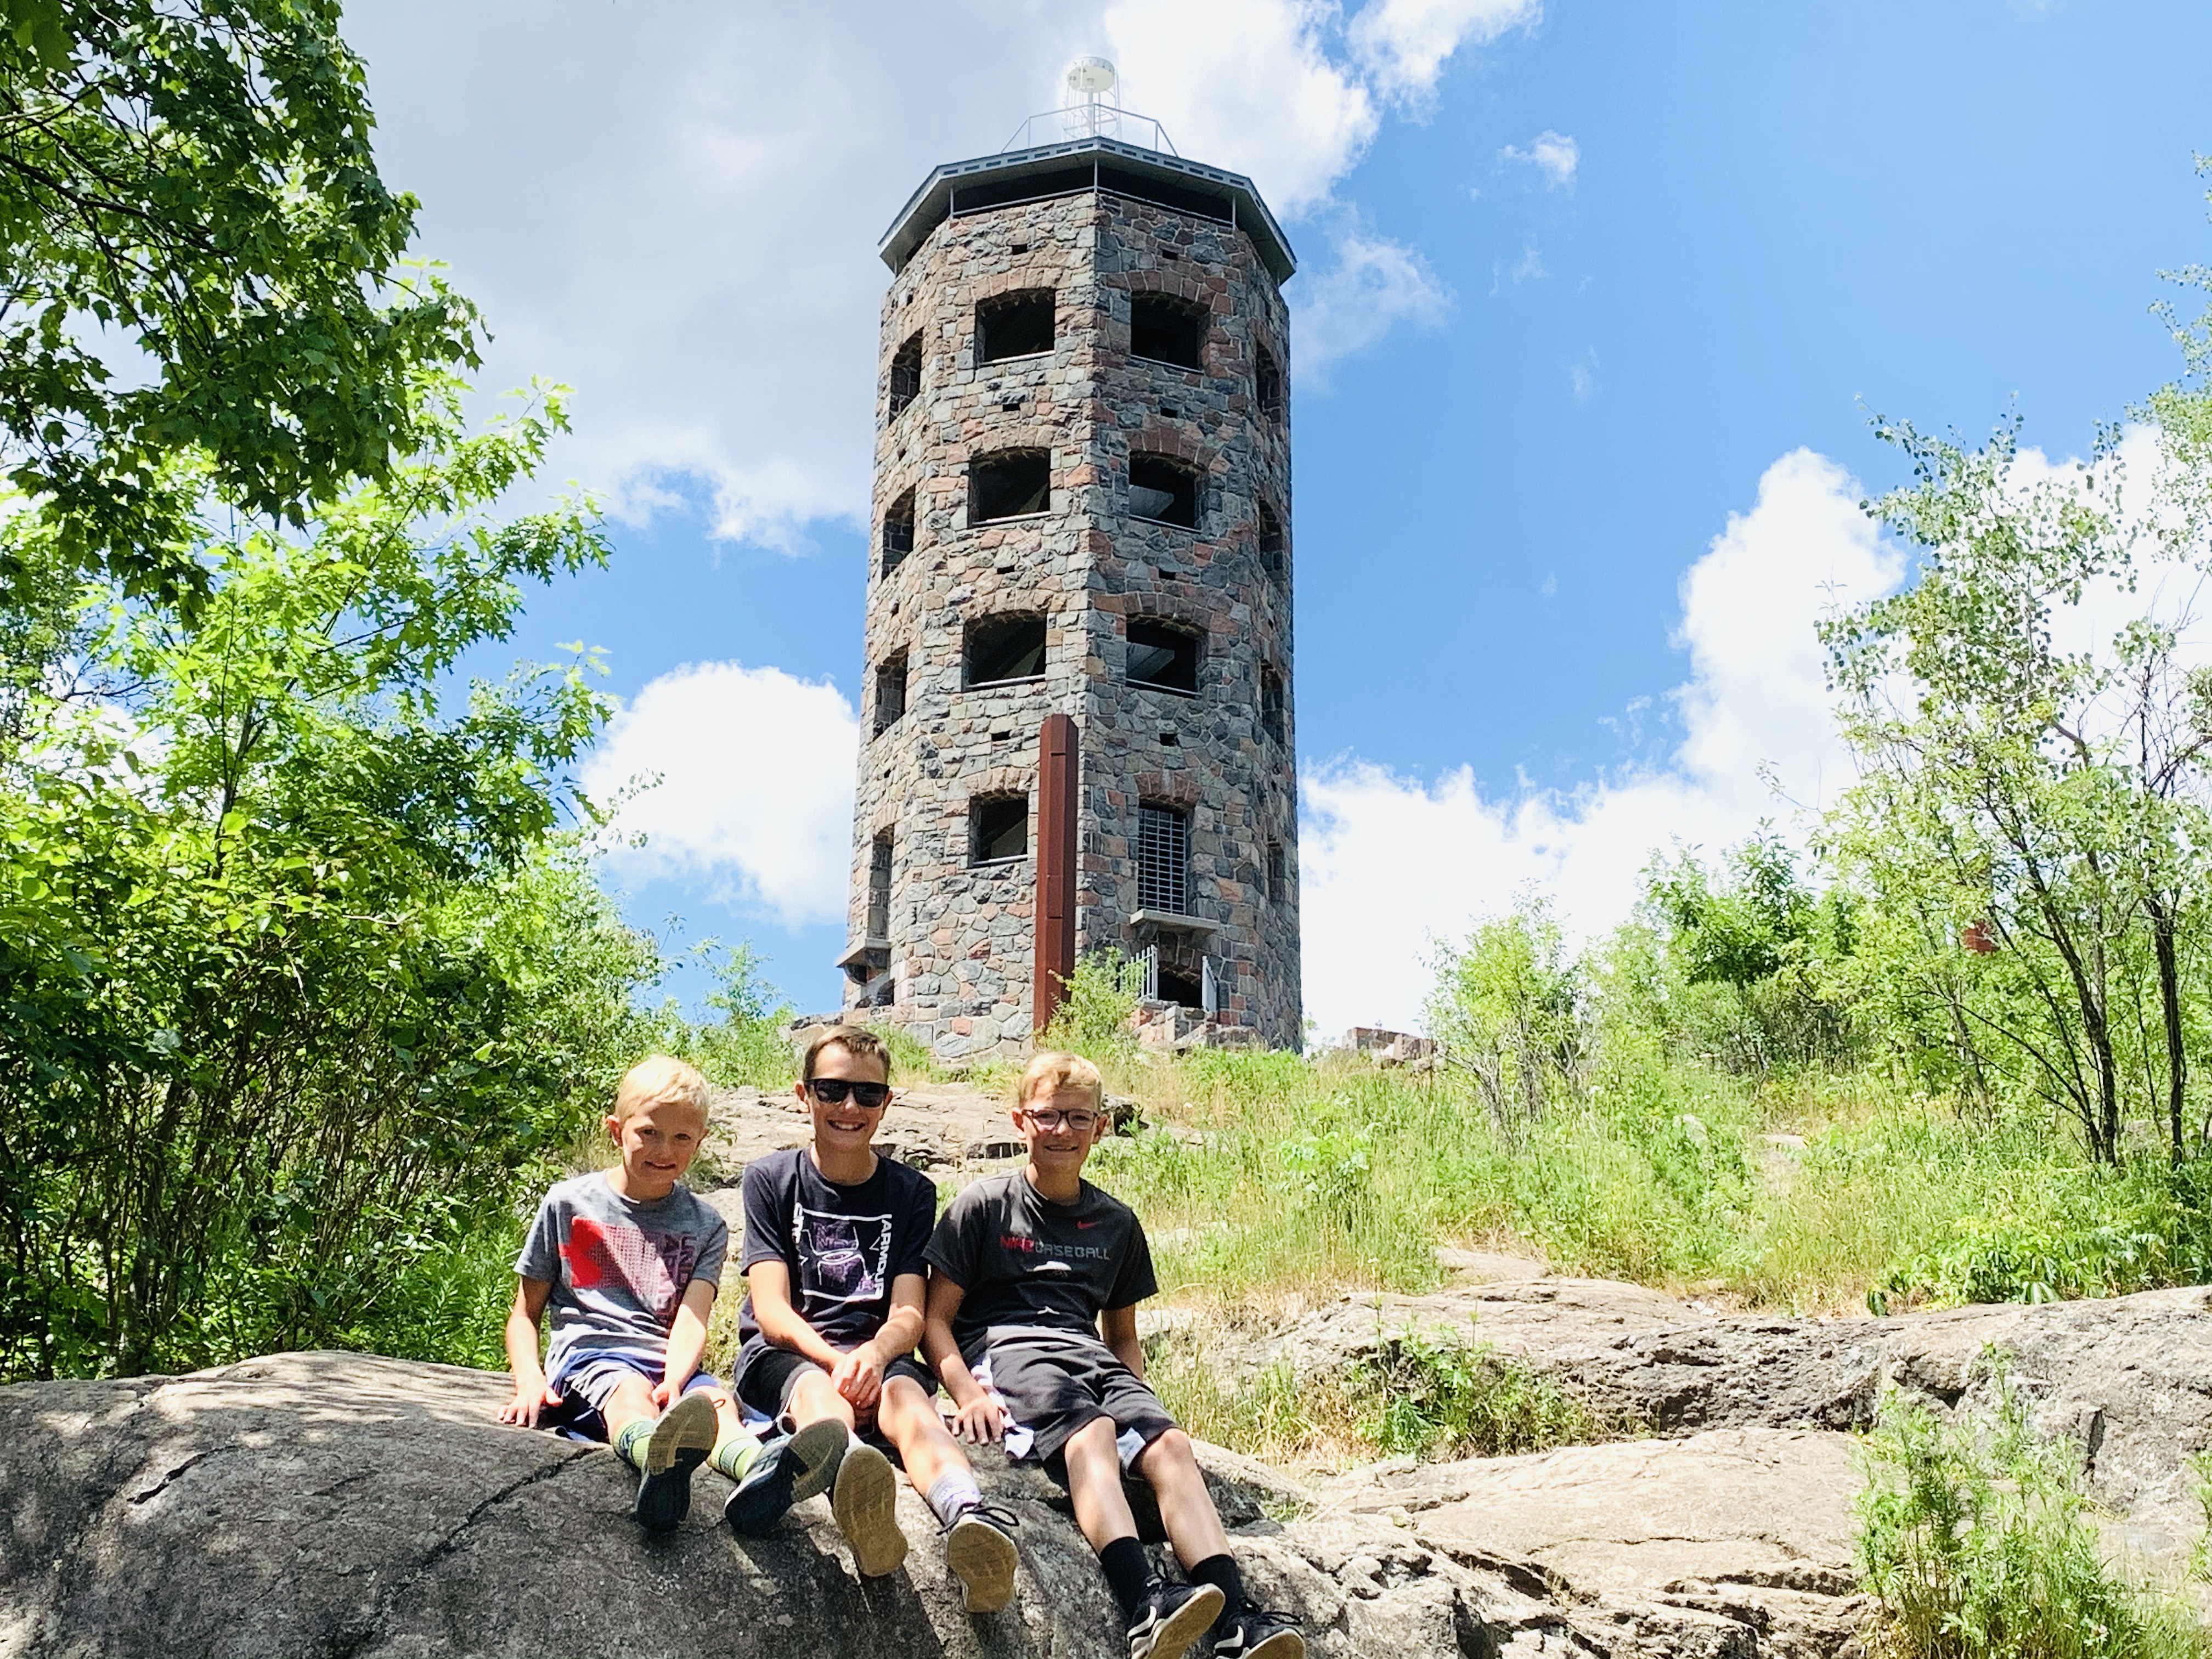 Check out our Duluth Family Vacation itinerary featured by top US family travel blog, Travel with a Plan: Enger Tower